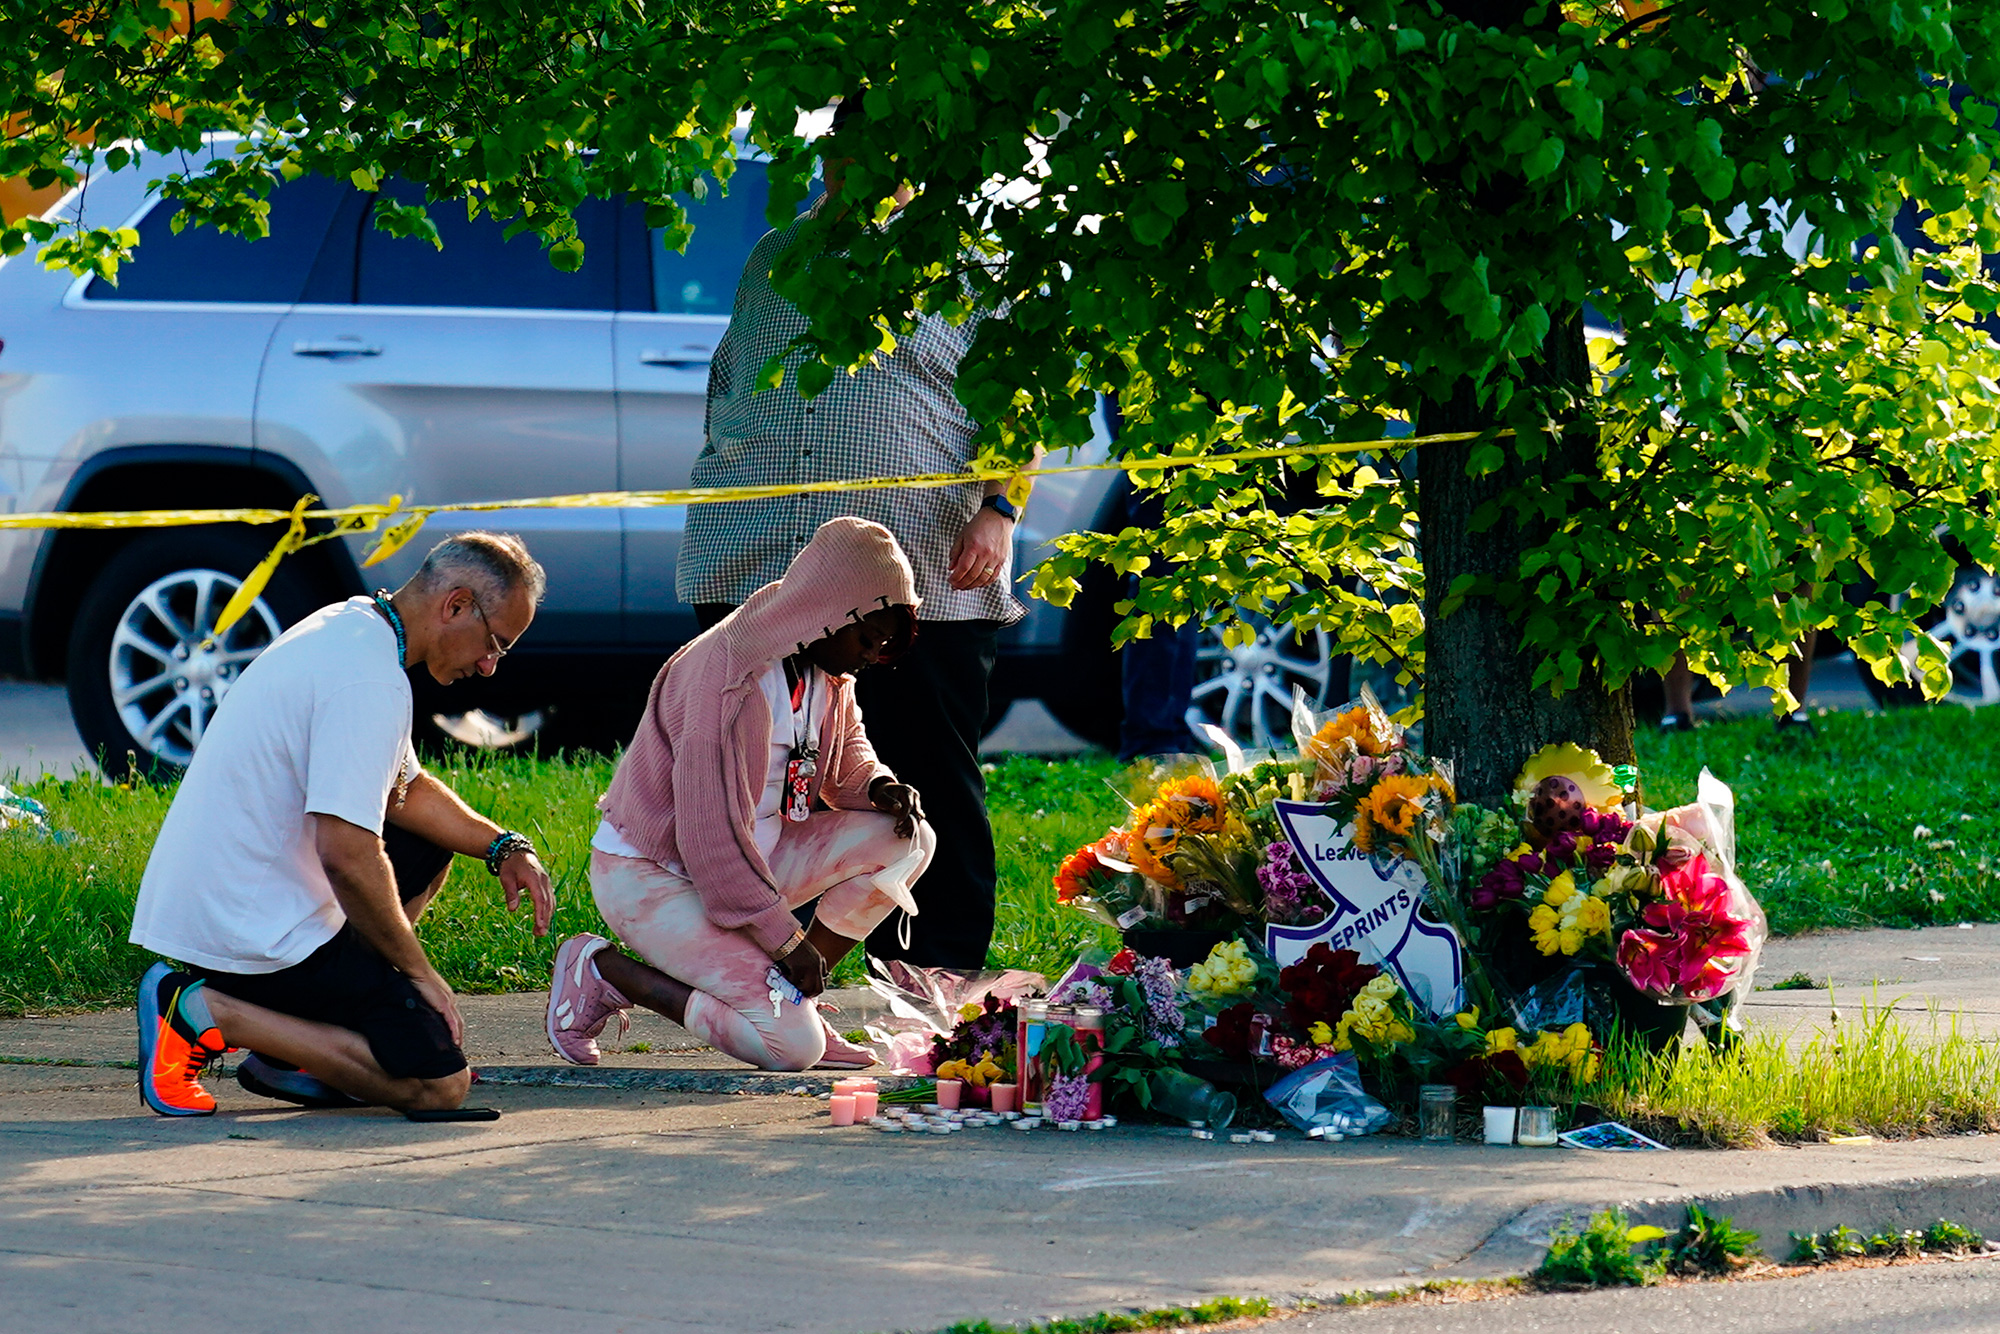 People pay their respects outside the scene of a shooting at a supermarket in Buffalo, New York, Sunday, May 15.